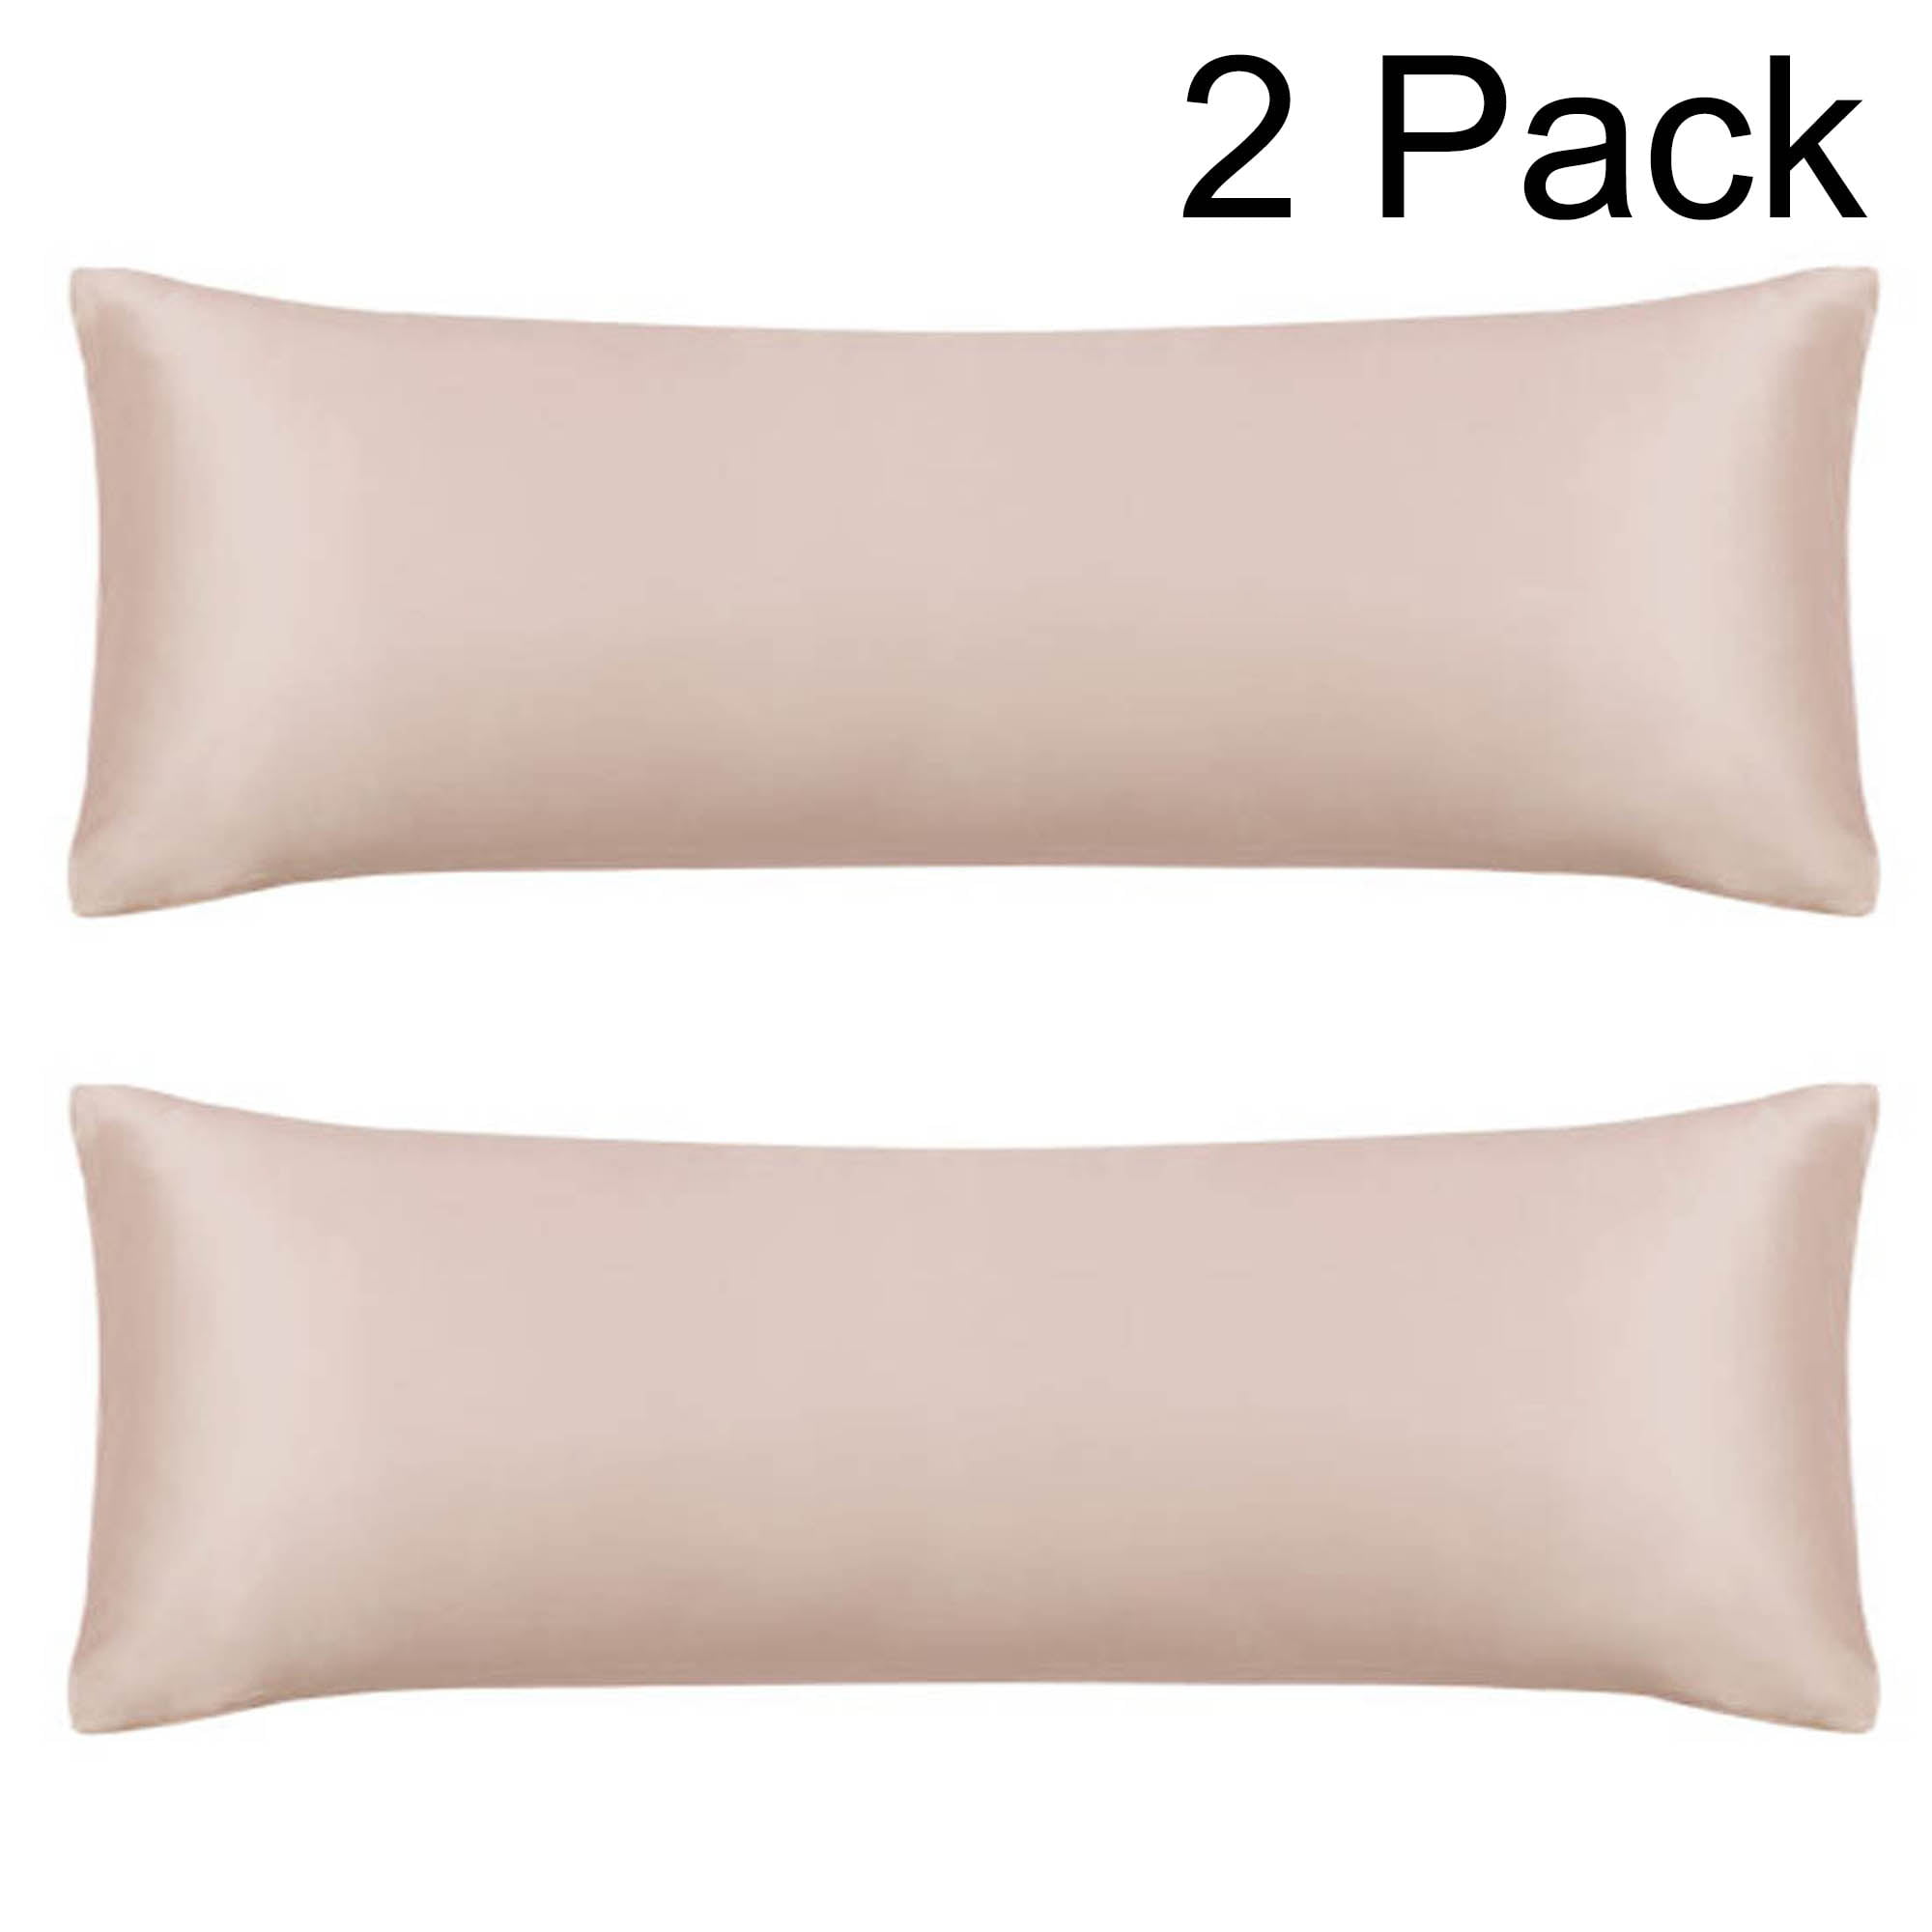 body pillow satin covers